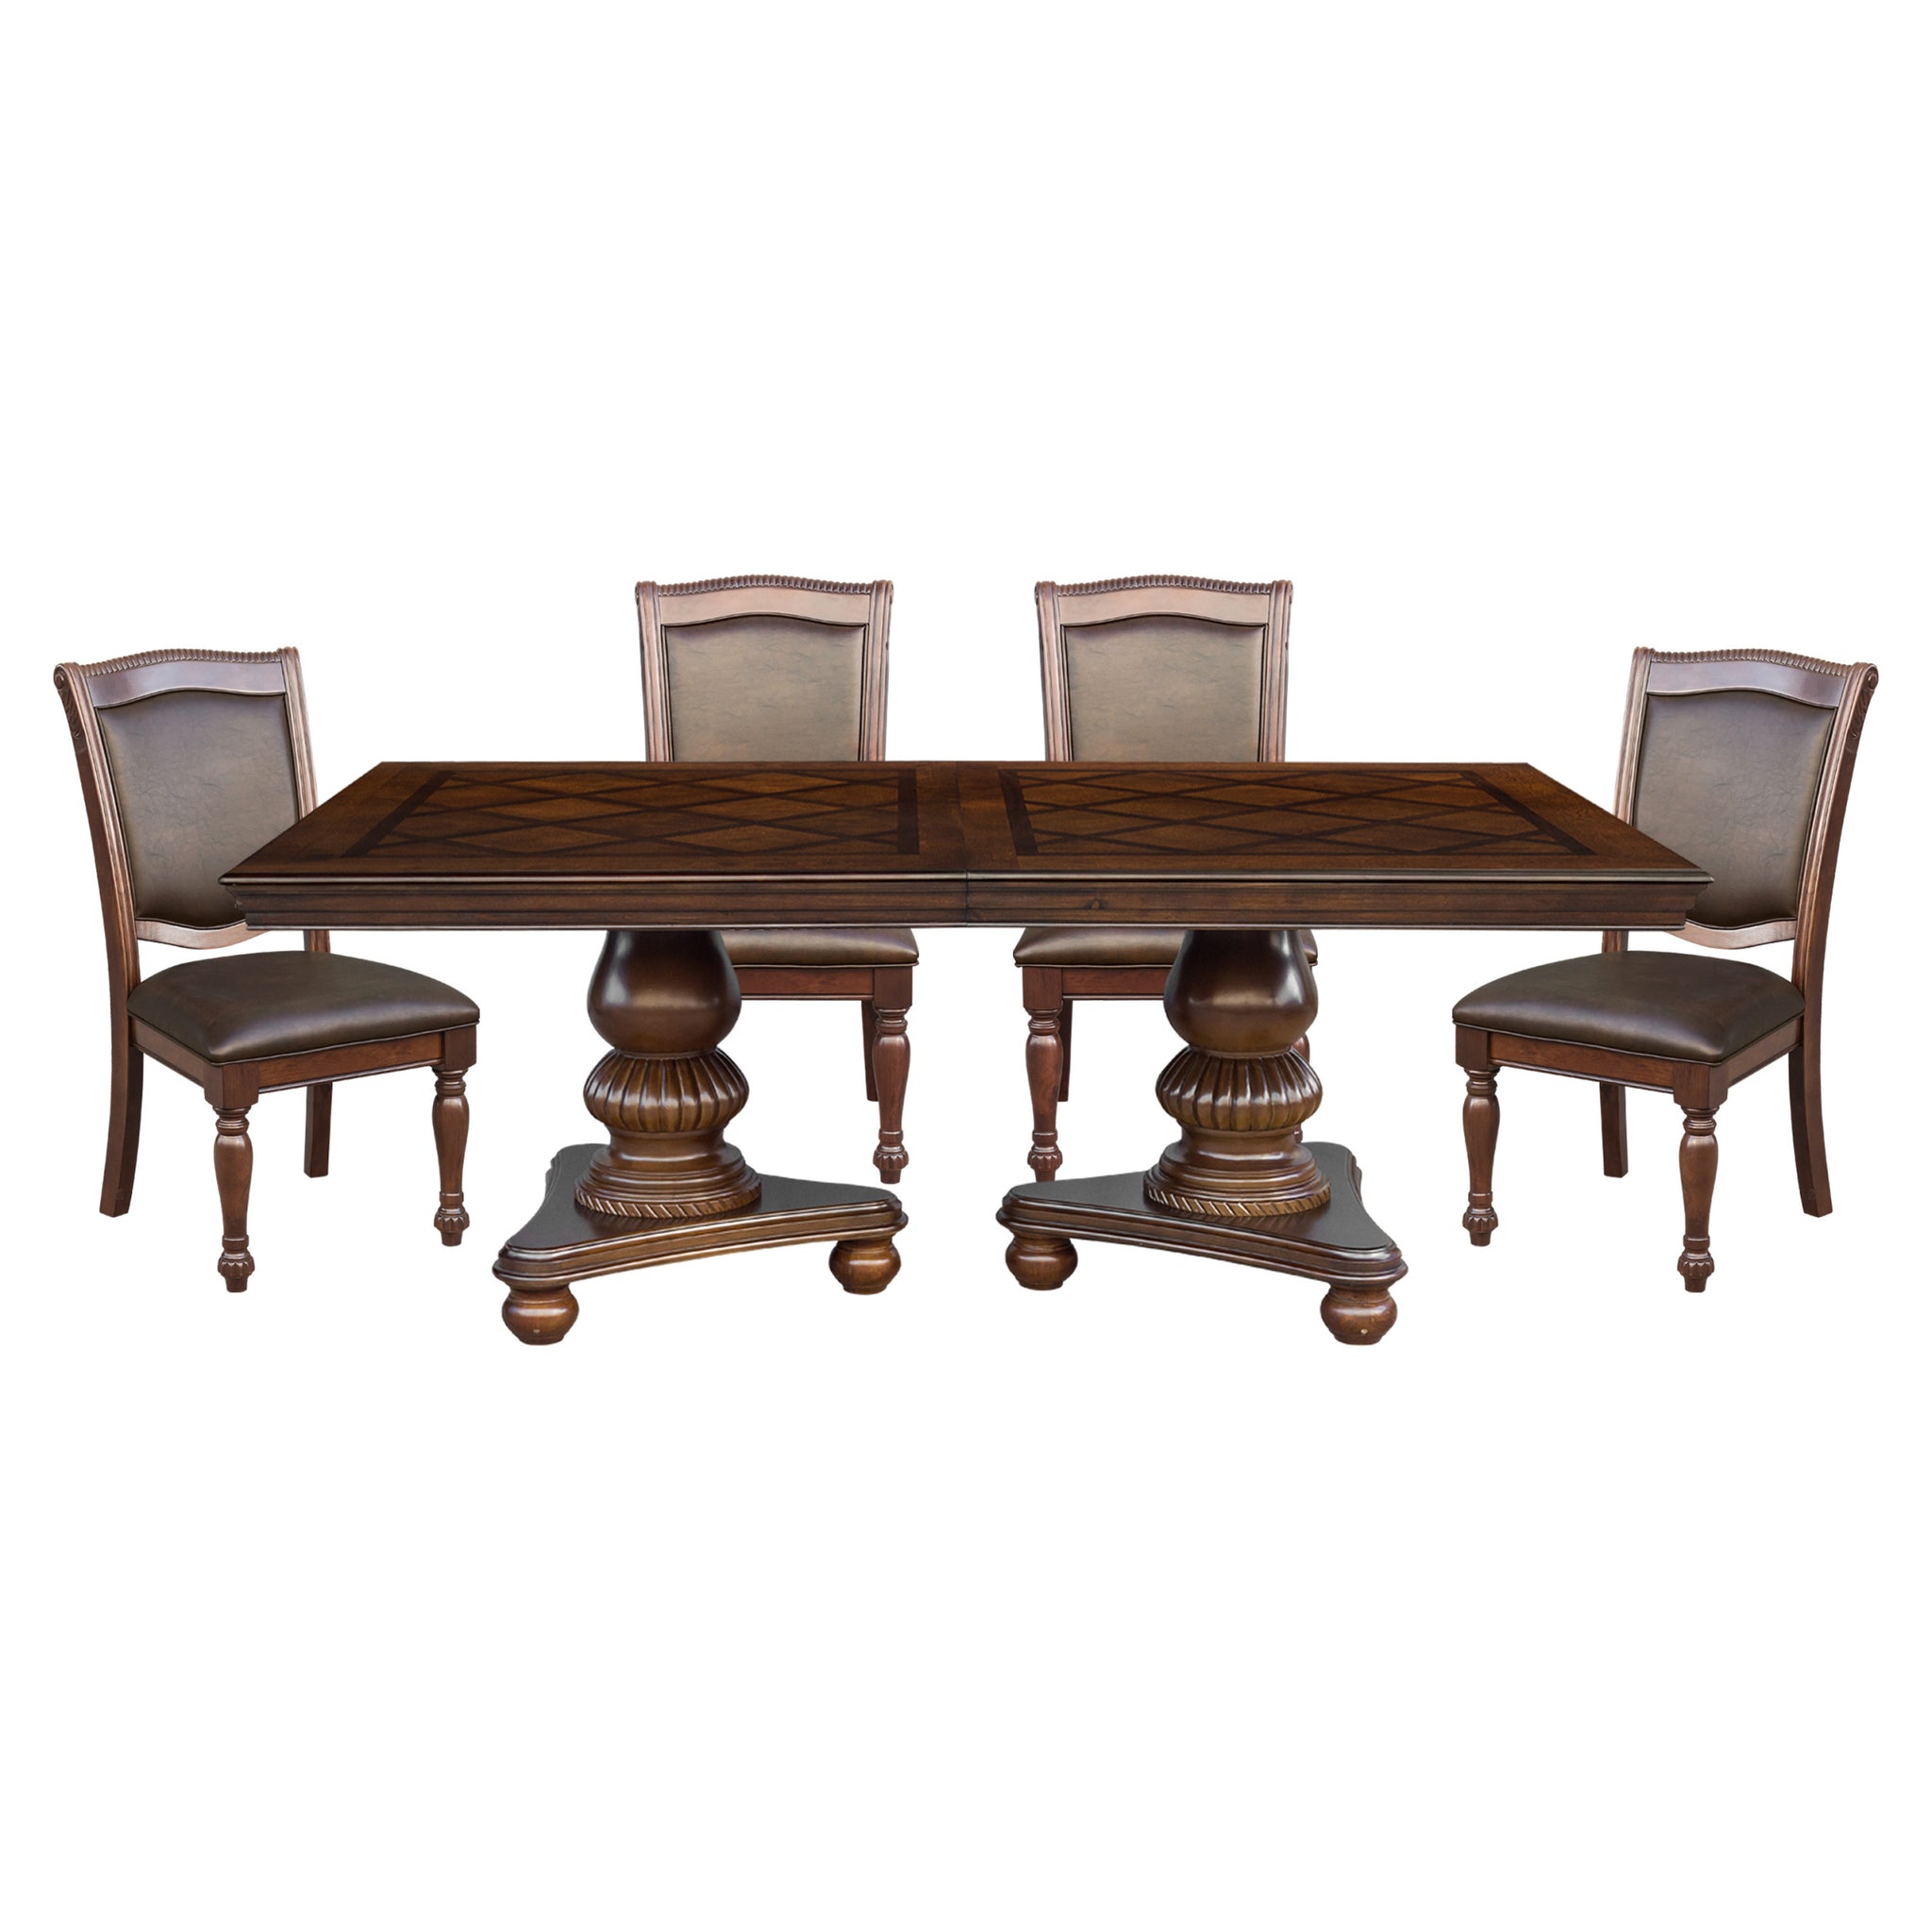 Traditional Style Dining Room Table w Leaf and 4x Side wood-wood-brown mix-seats 4-wood-dining